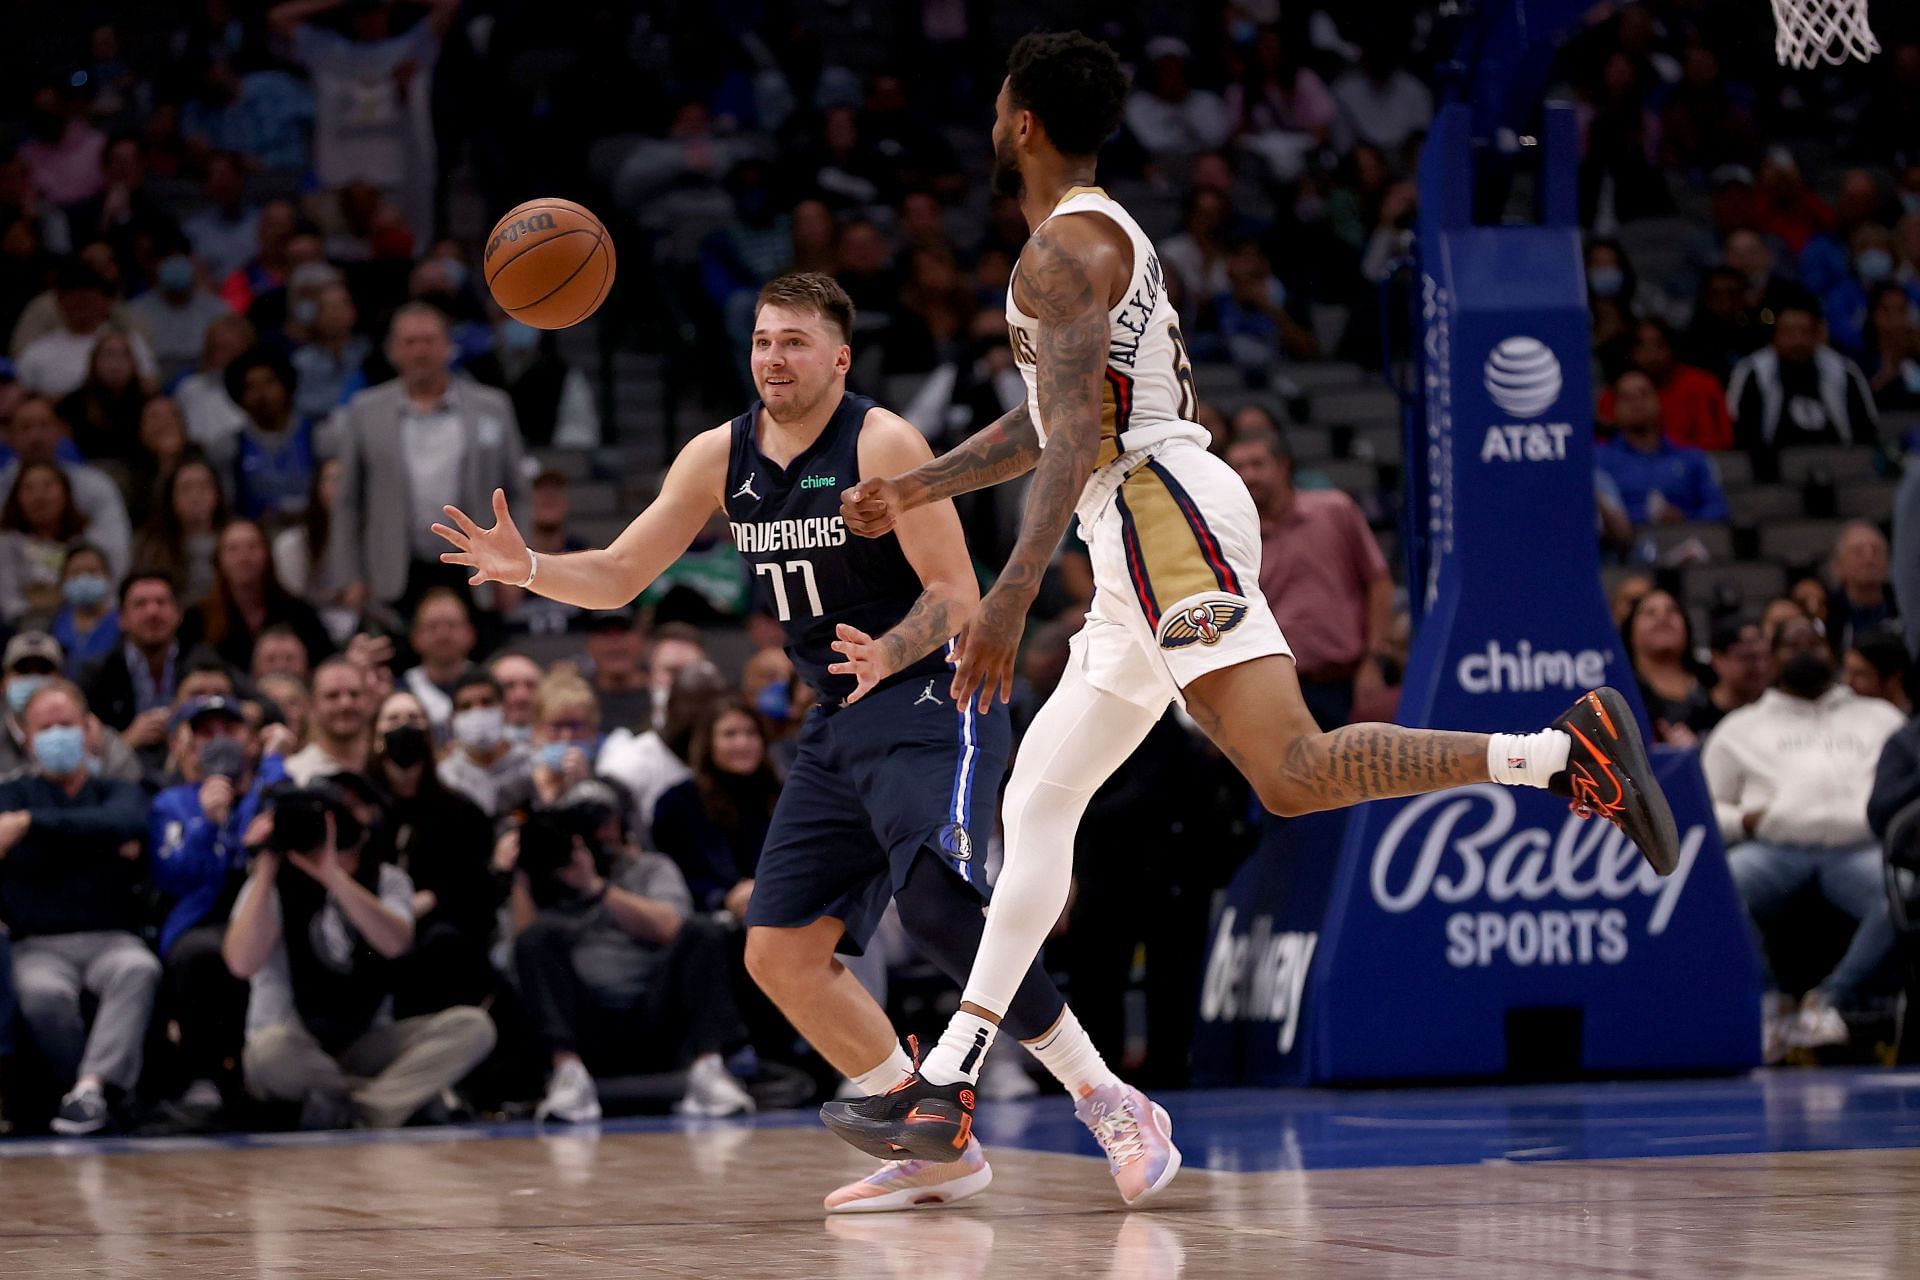 The New Orleans Pelicans and the Dallas Mavericks will face off on Friday night